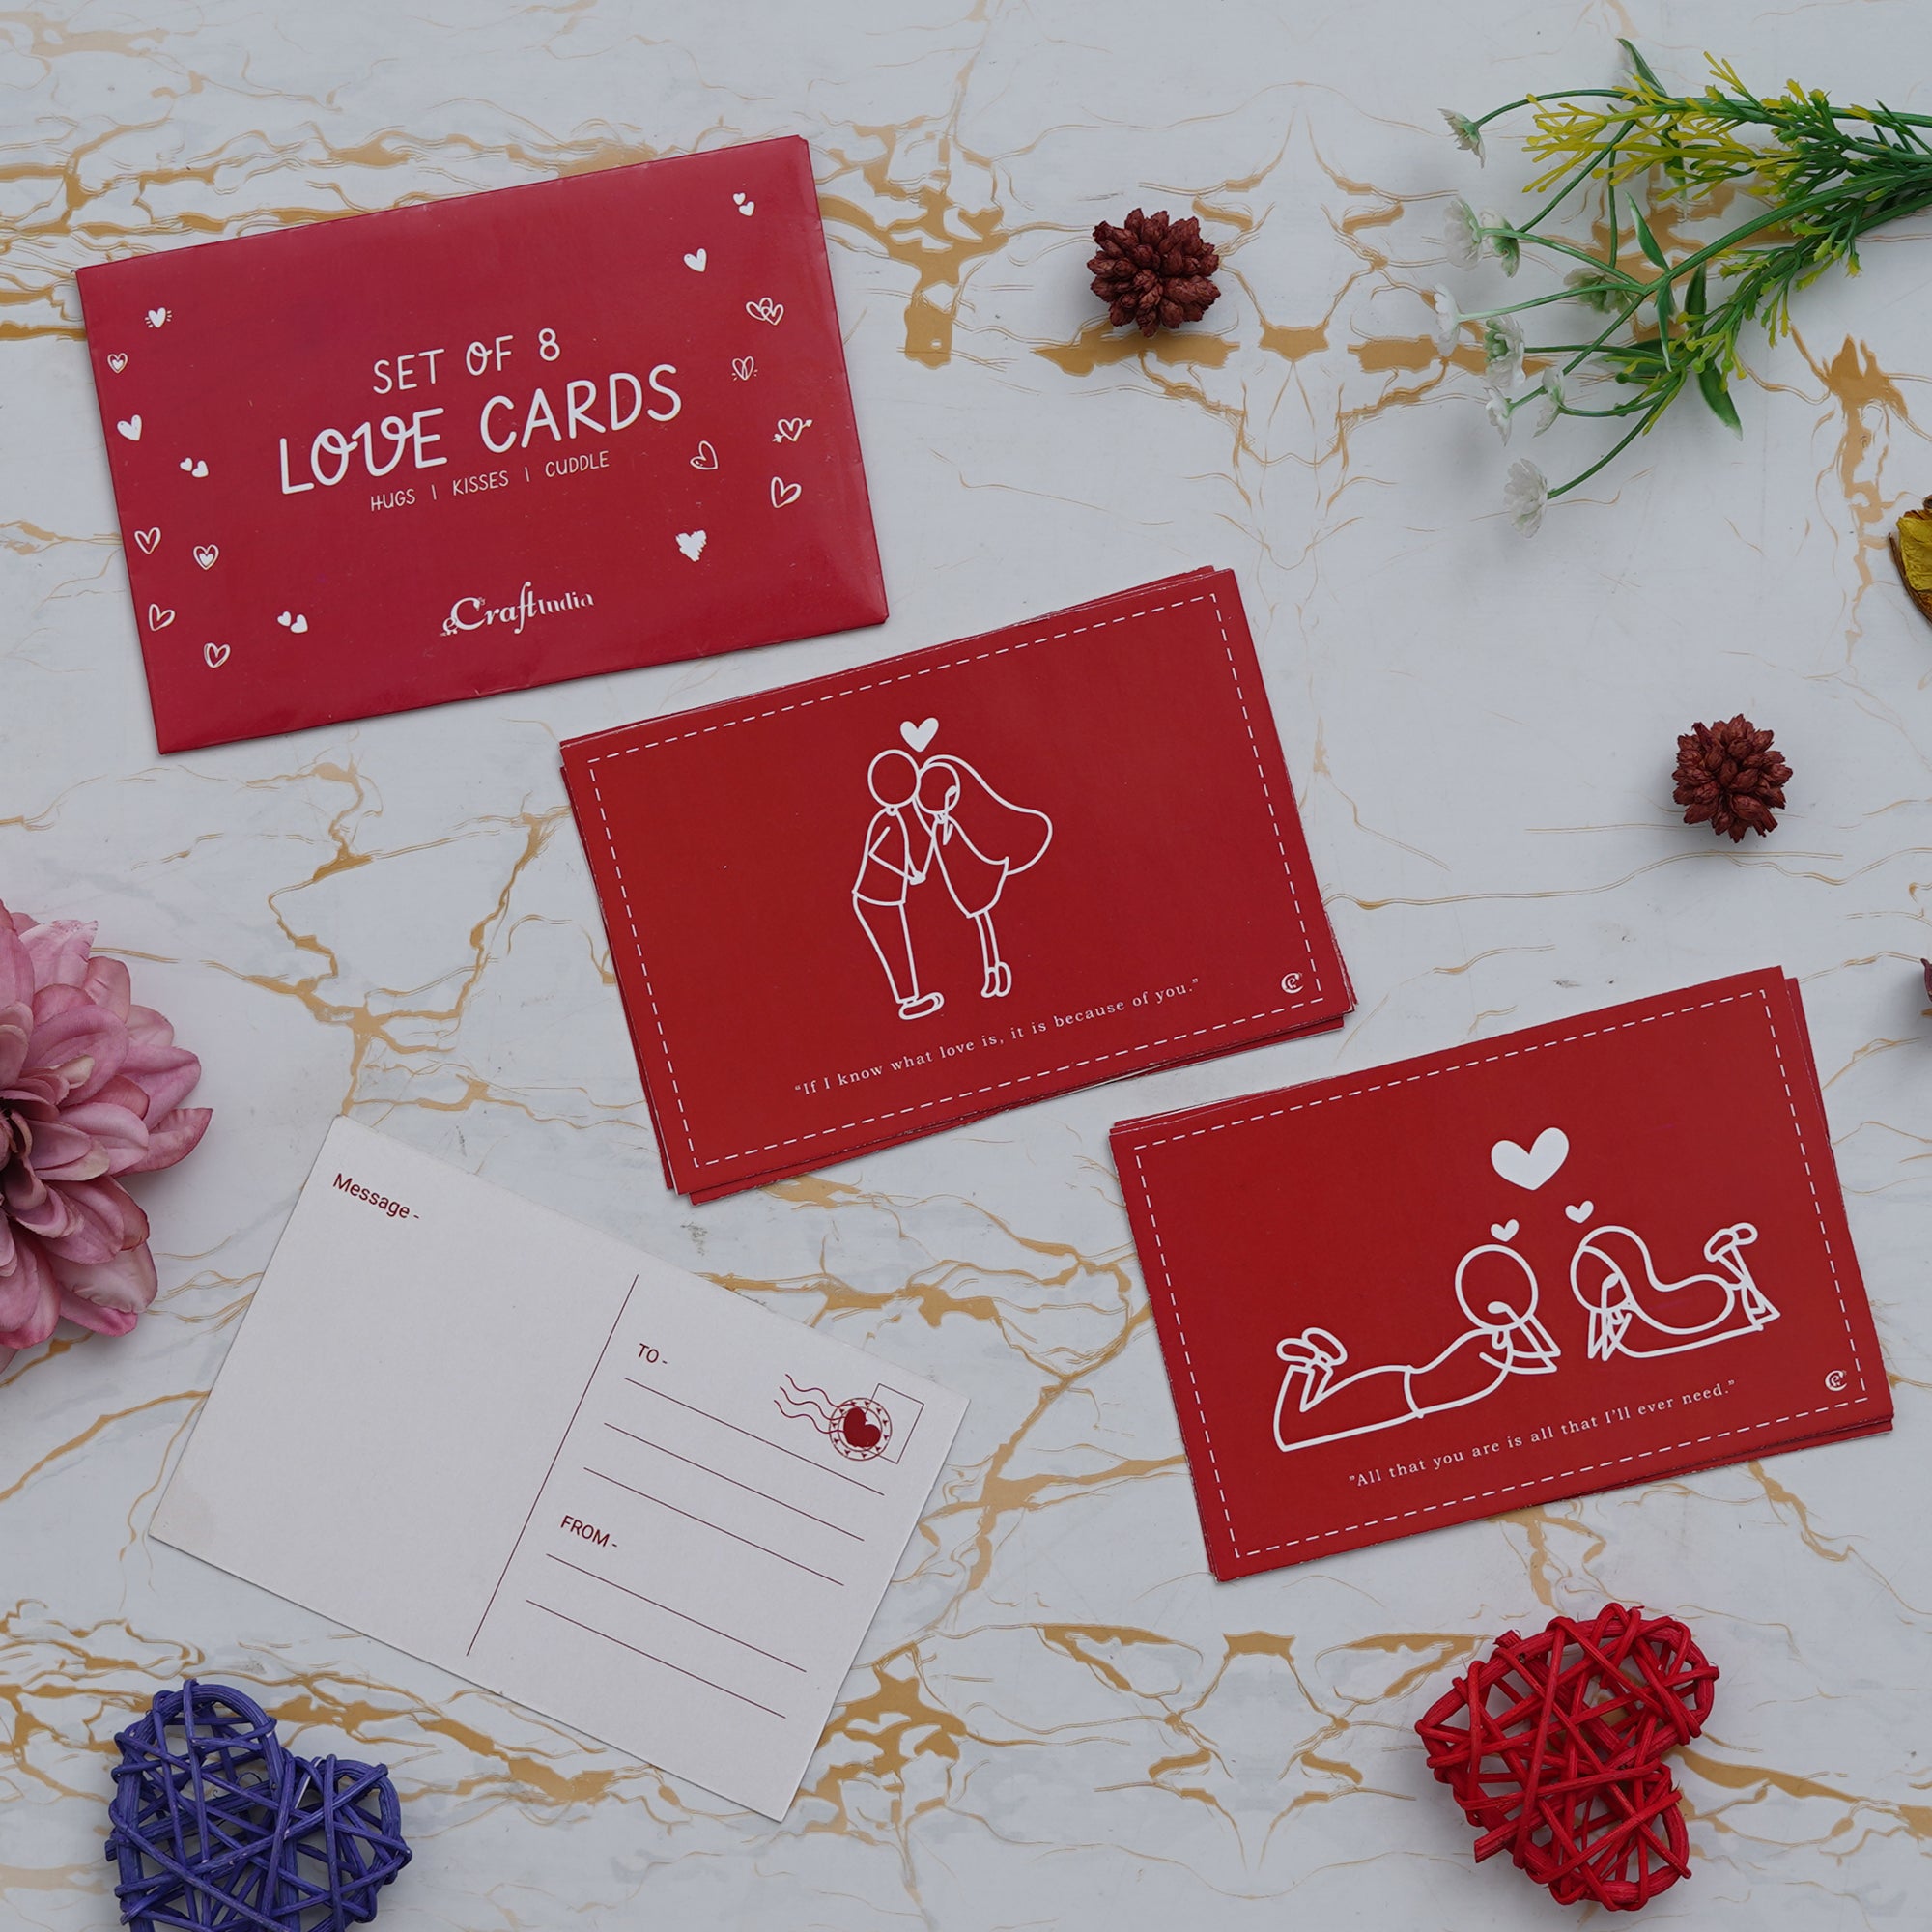 Valentine Combo of Pack of 8 Love Gift Cards, "20 Reasons Why I Love You" Printed on Little Hearts Wooden Gift Set 1